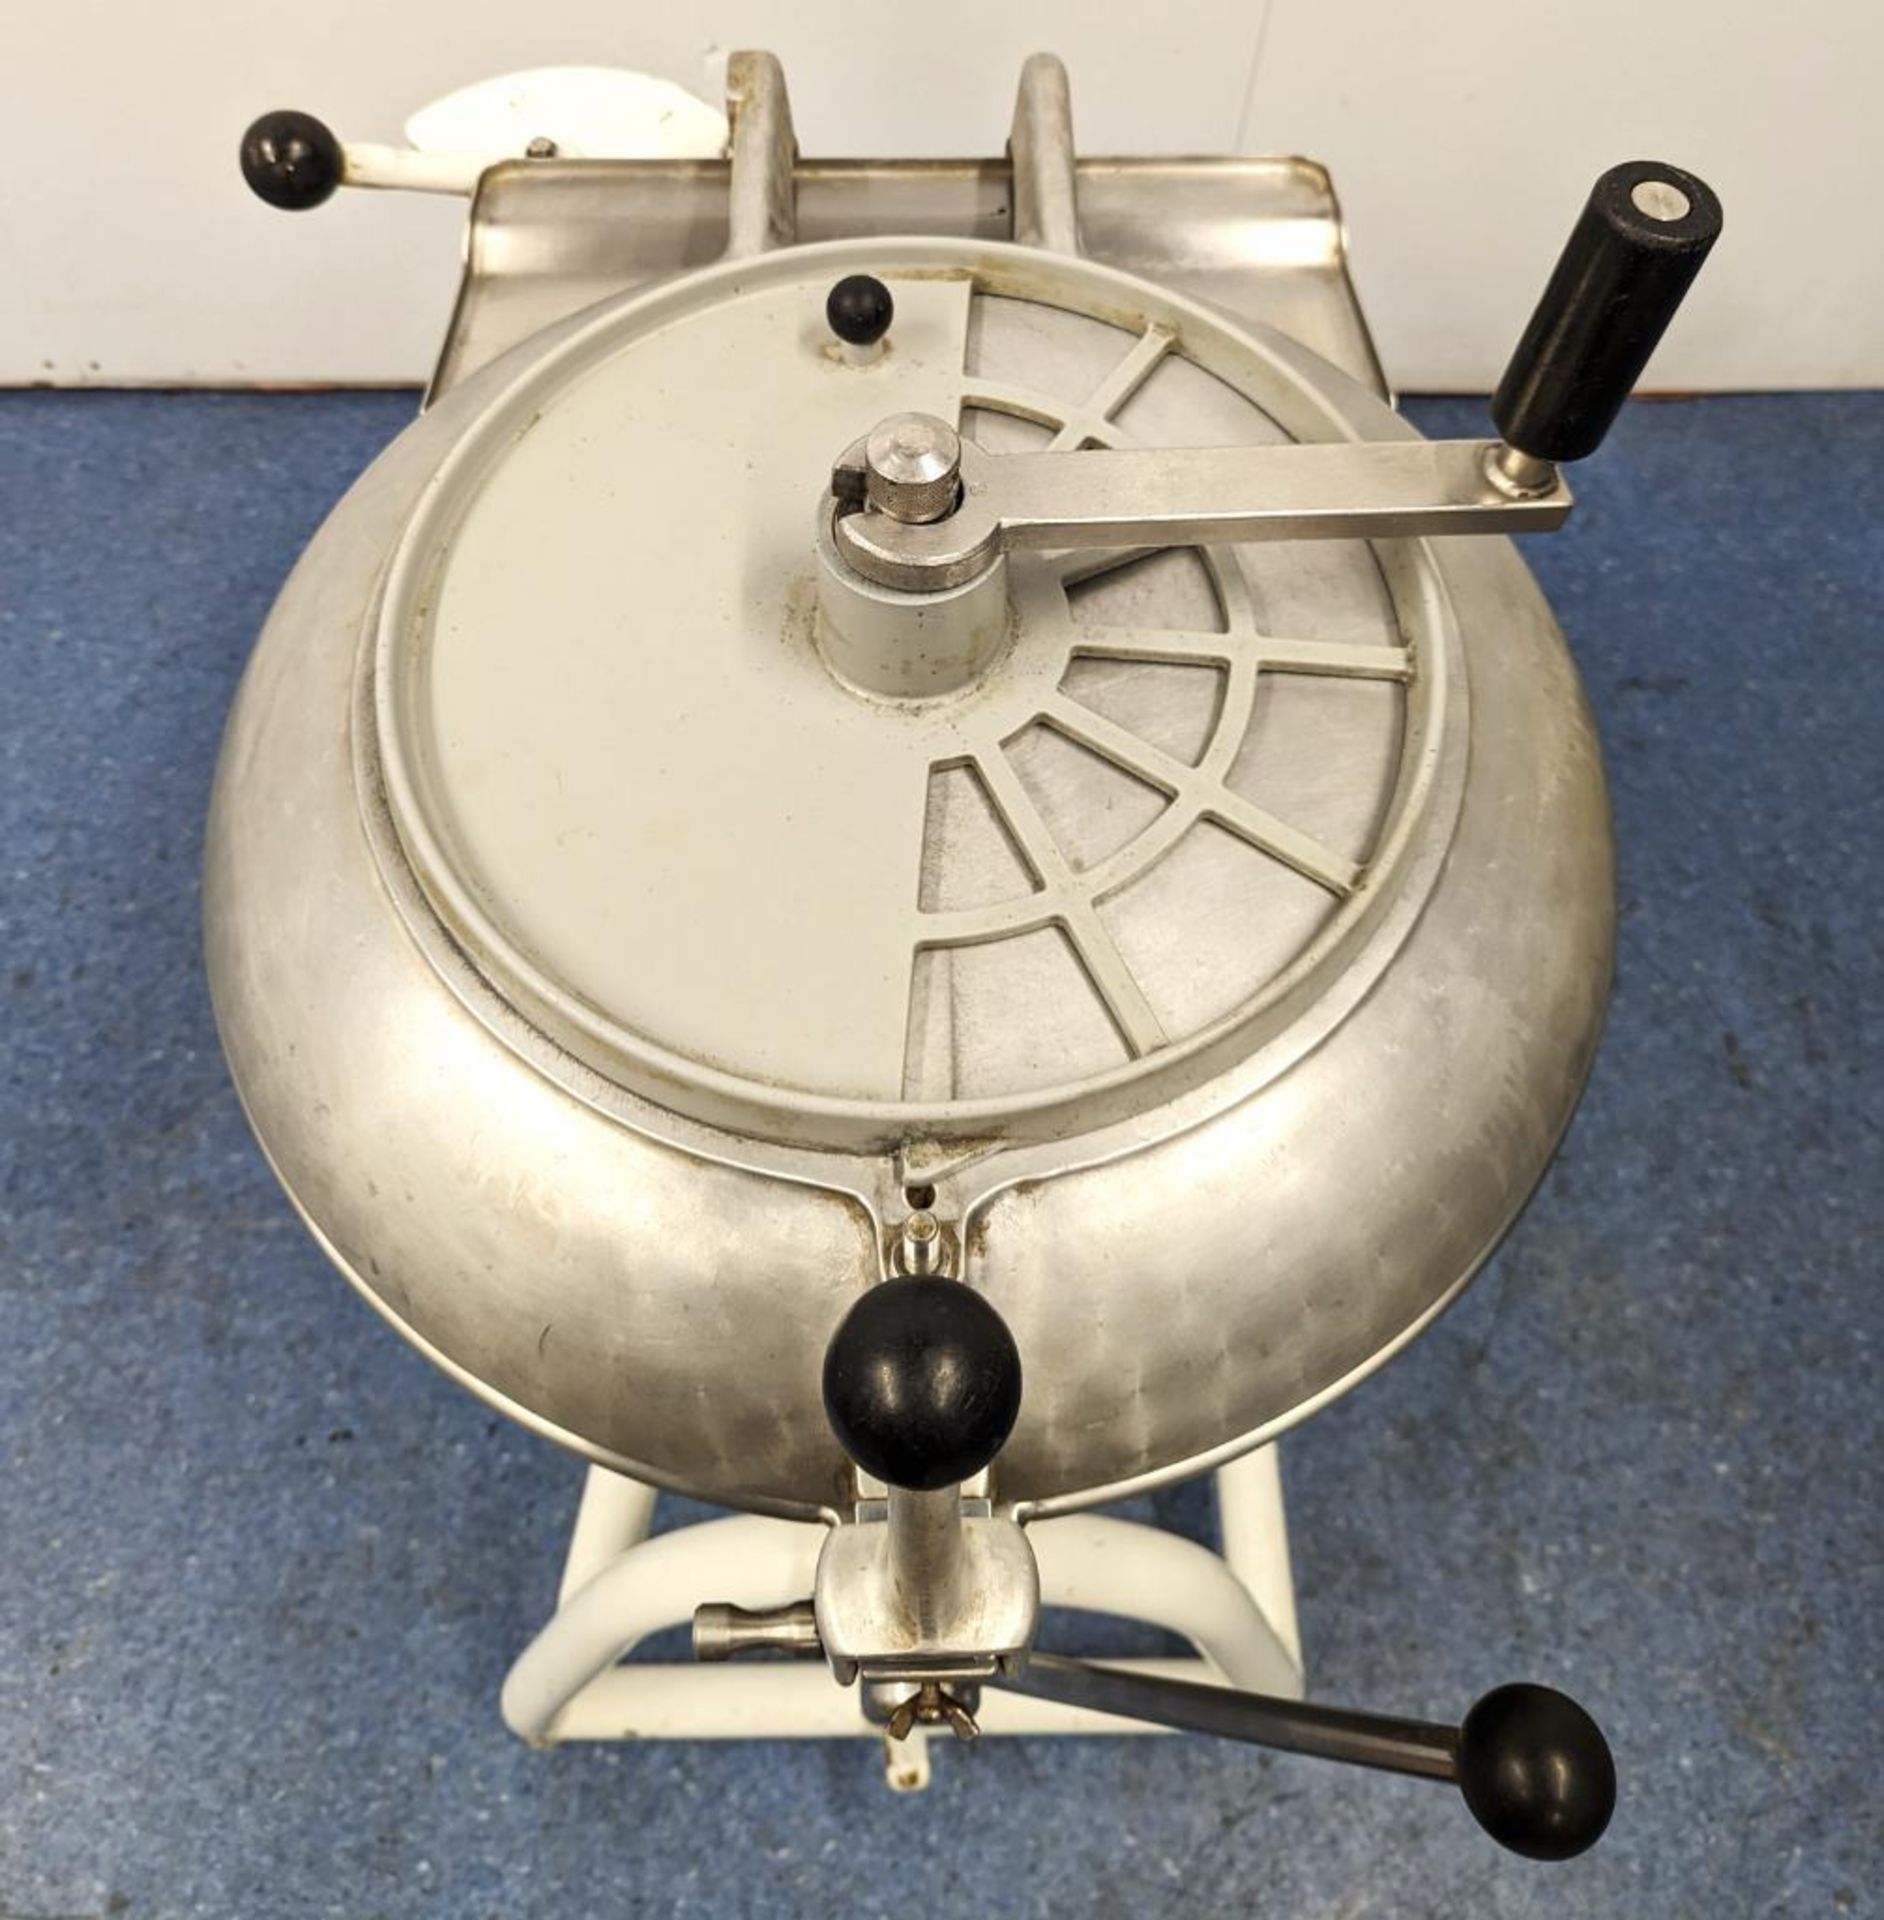 STEPHAN VCM-40 VERTICAL CUTTER/MIXER WITH MIX SHAFT - Image 9 of 14